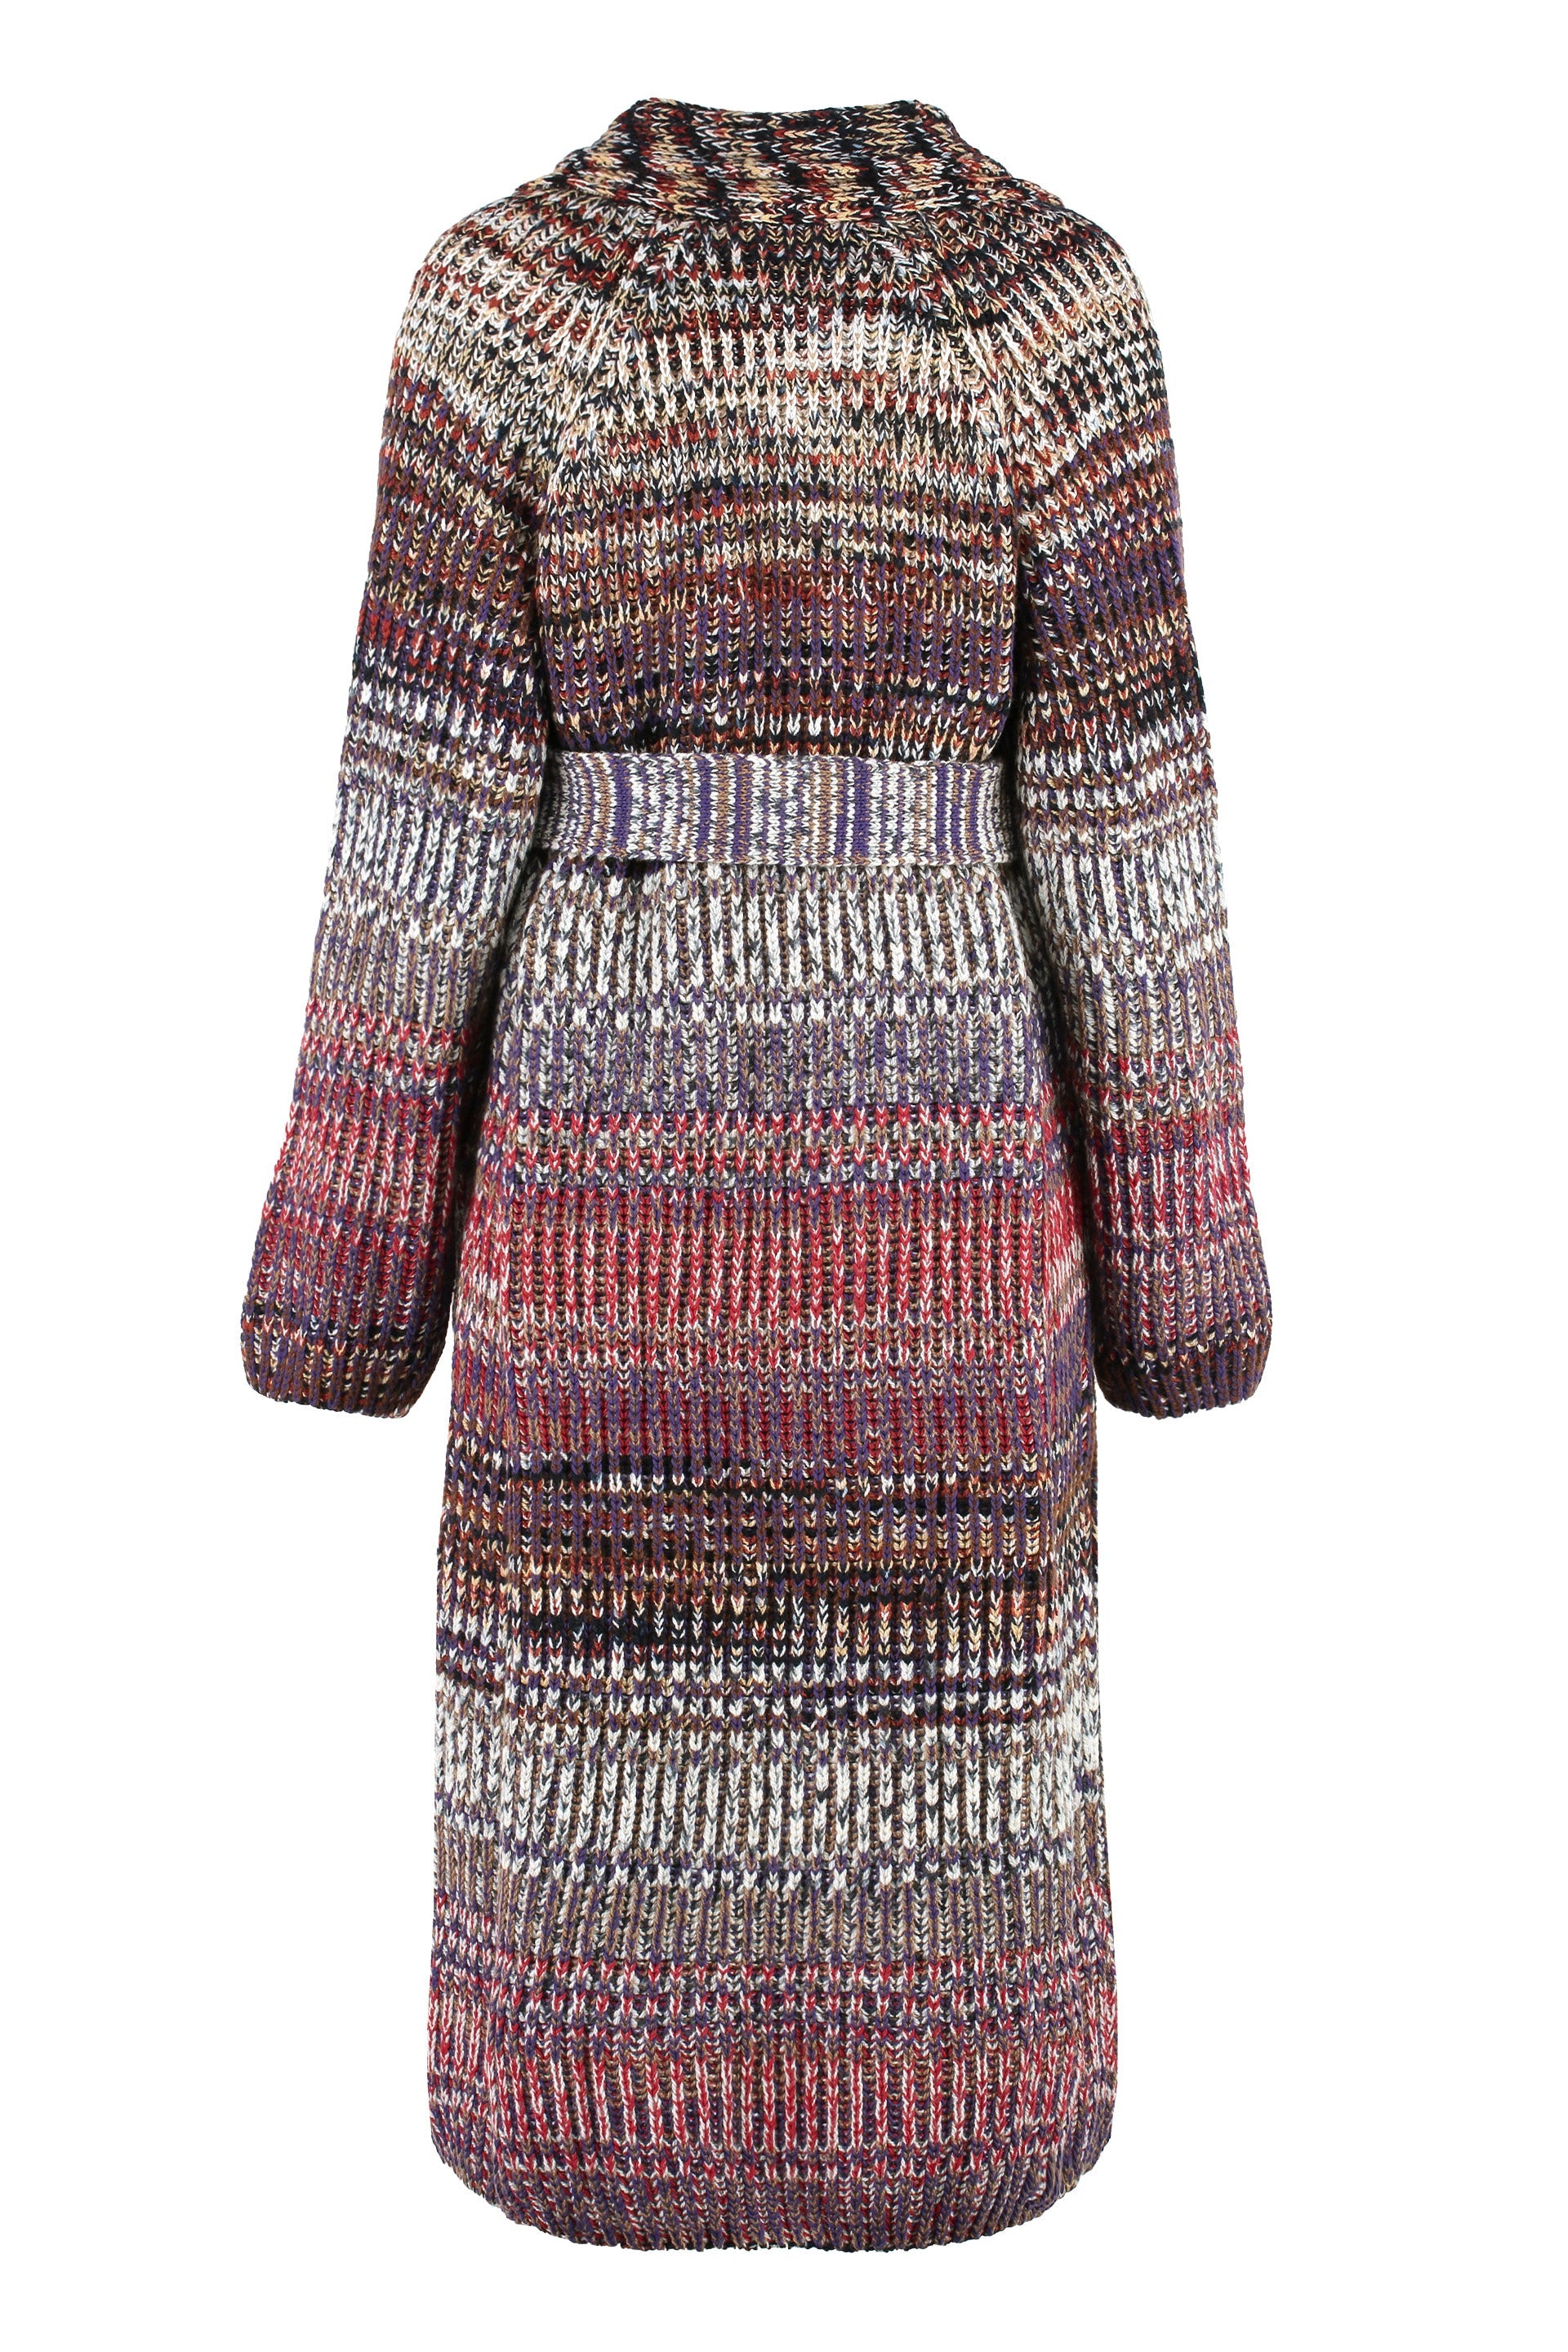 Missoni-OUTLET-SALE-Ribbed-knit-cardigan-Strick-XS-ARCHIVE-COLLECTION-2.jpg